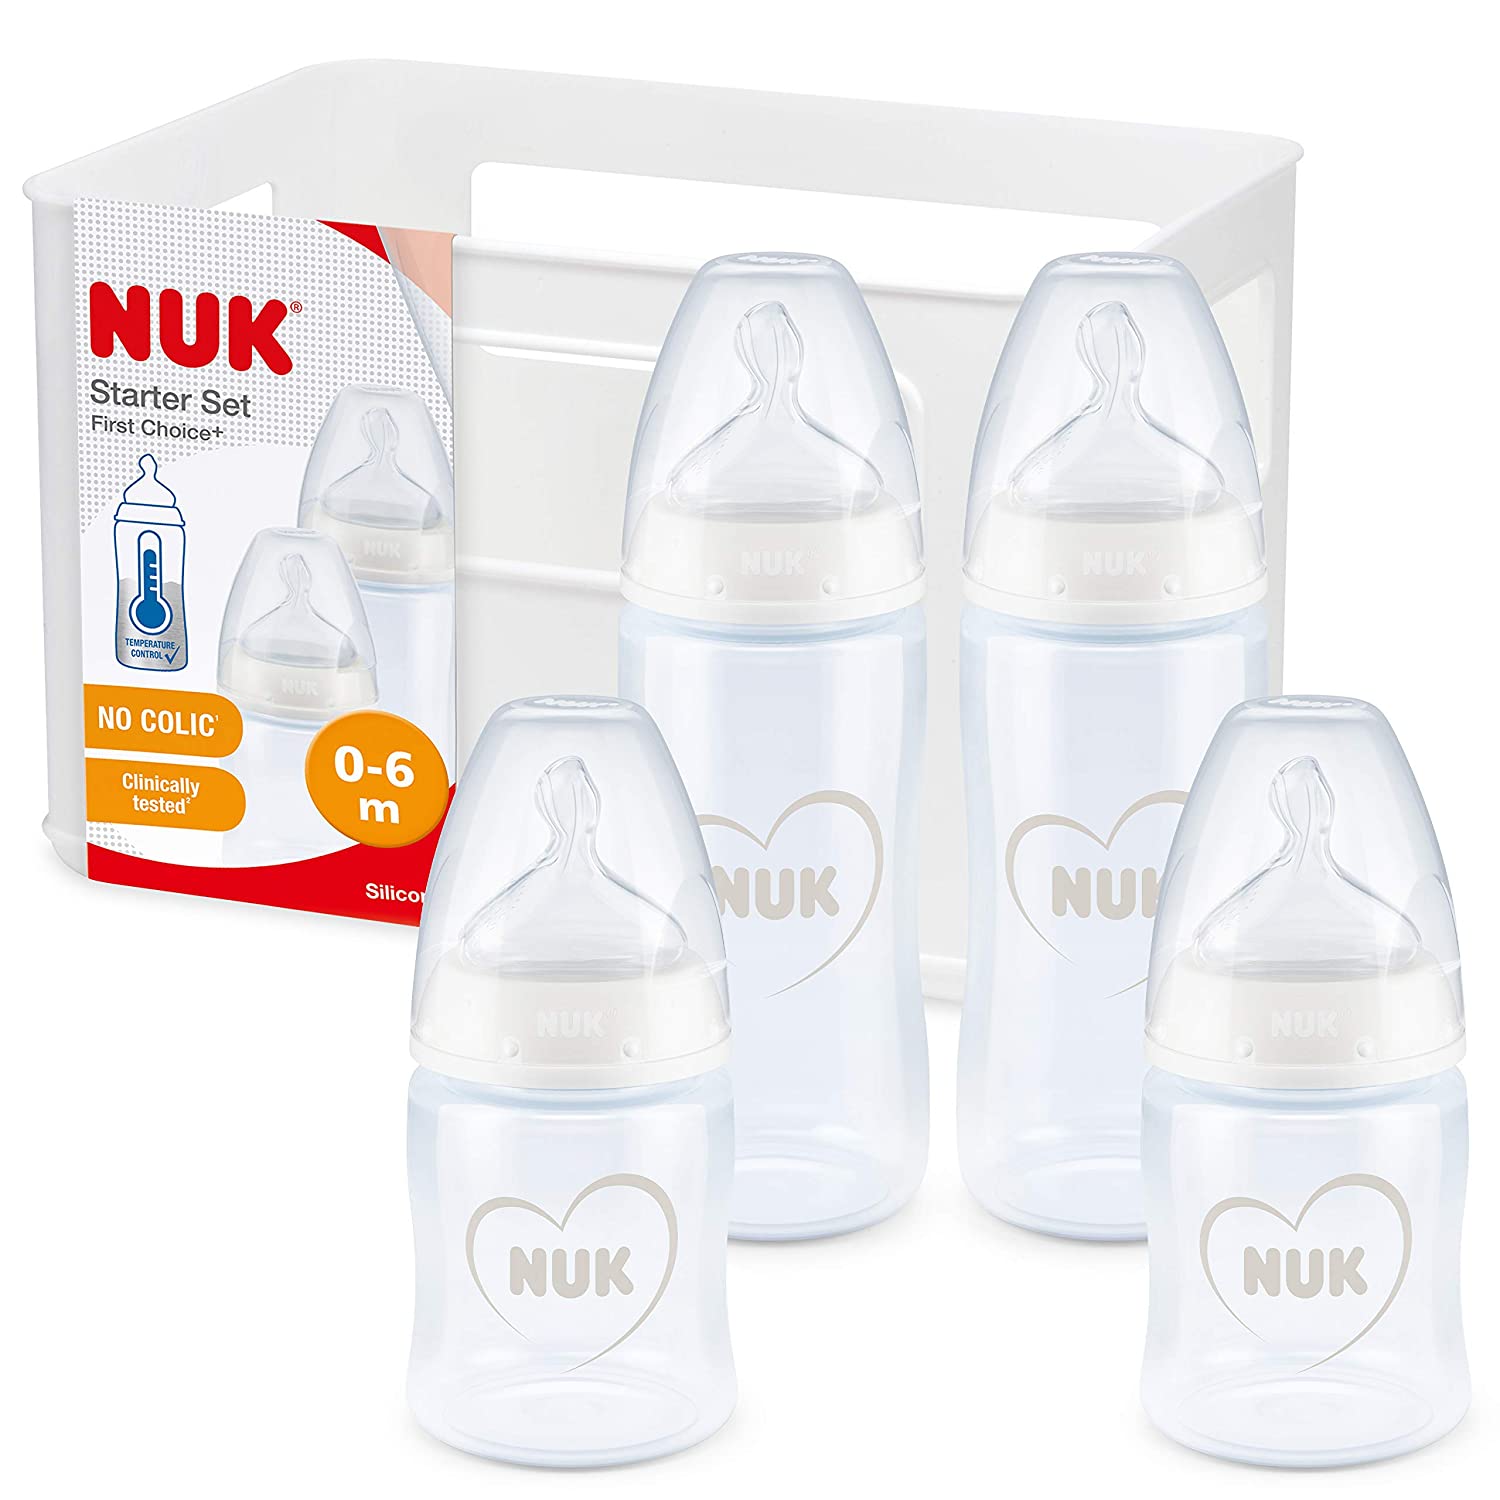 NUK First Choice⁺ Baby Bottle Starter Set Including Bottle Box, 0–6 Months, Anti-Colic, BPA-Free Hearts (white)